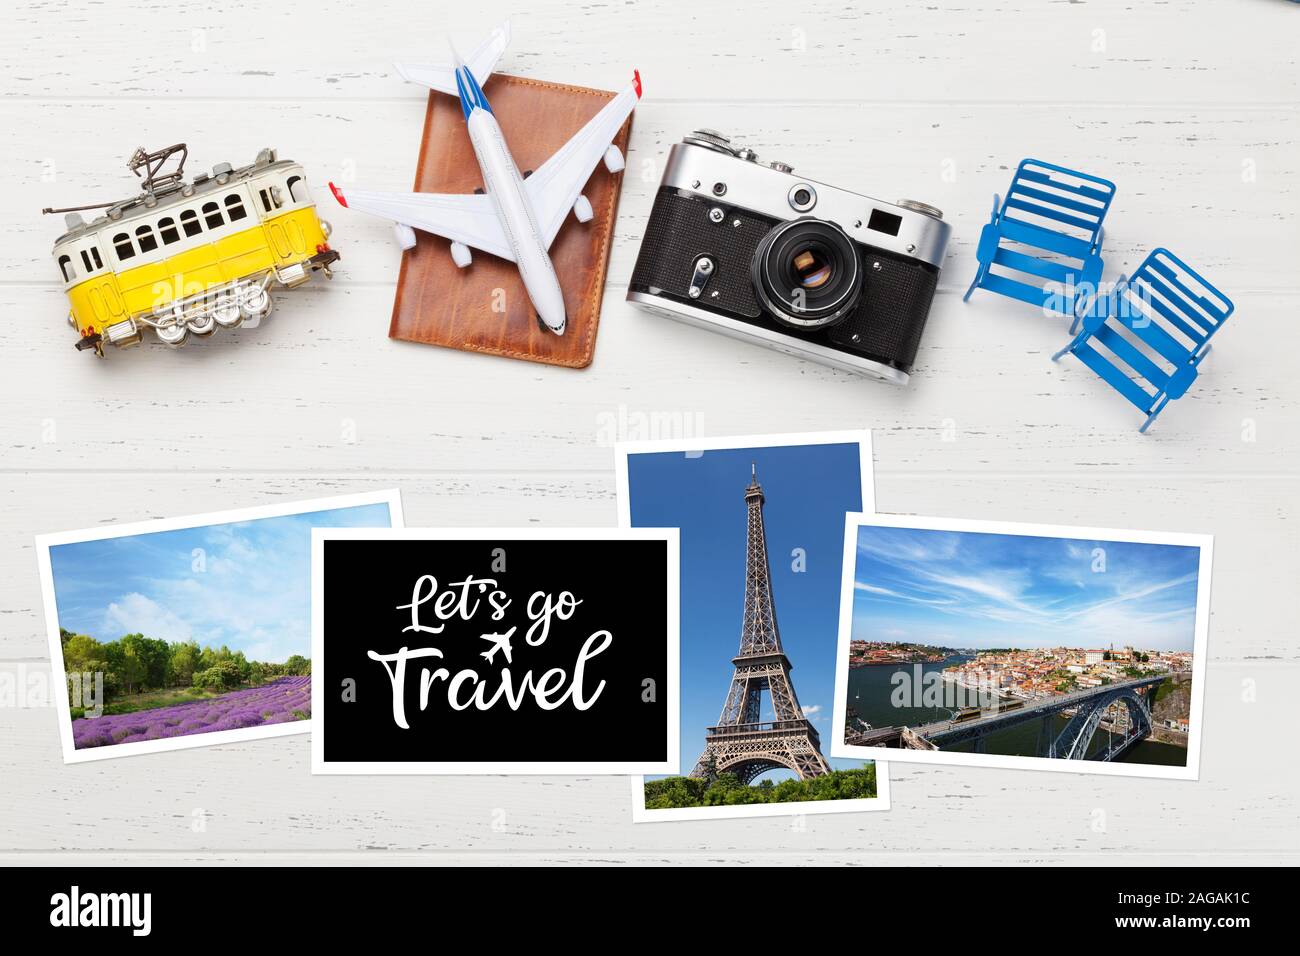 Travel concept with photos, airplane toy, camera and passport. Top view flat lay with copy space Stock Photo